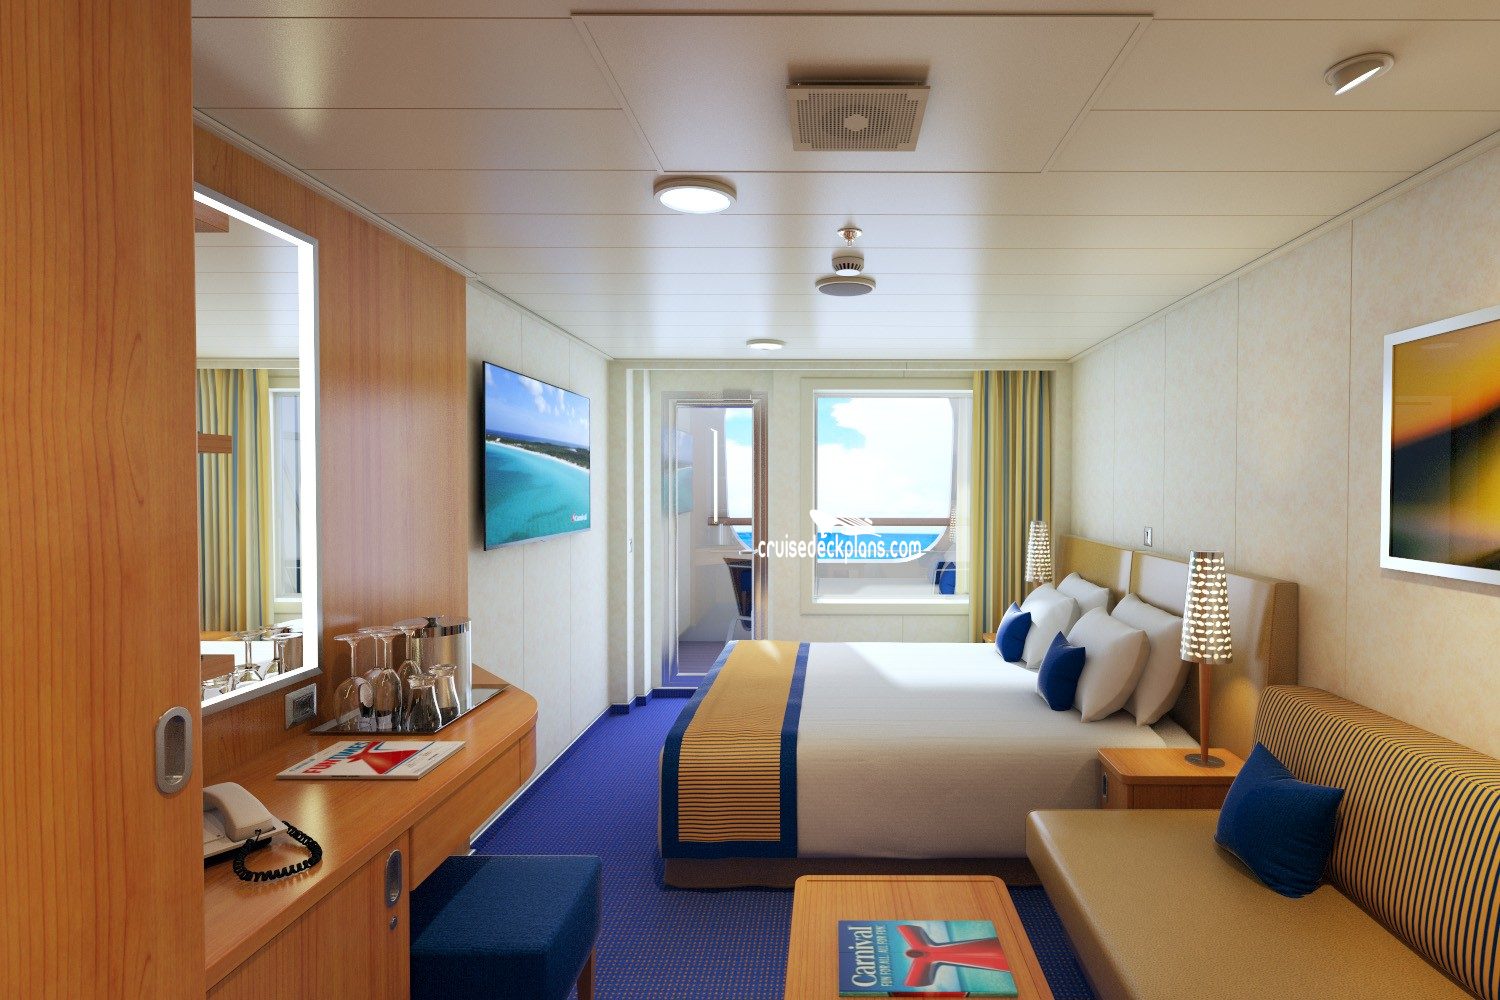 Carnival Panorama Cove Balcony Stateroom Cabins